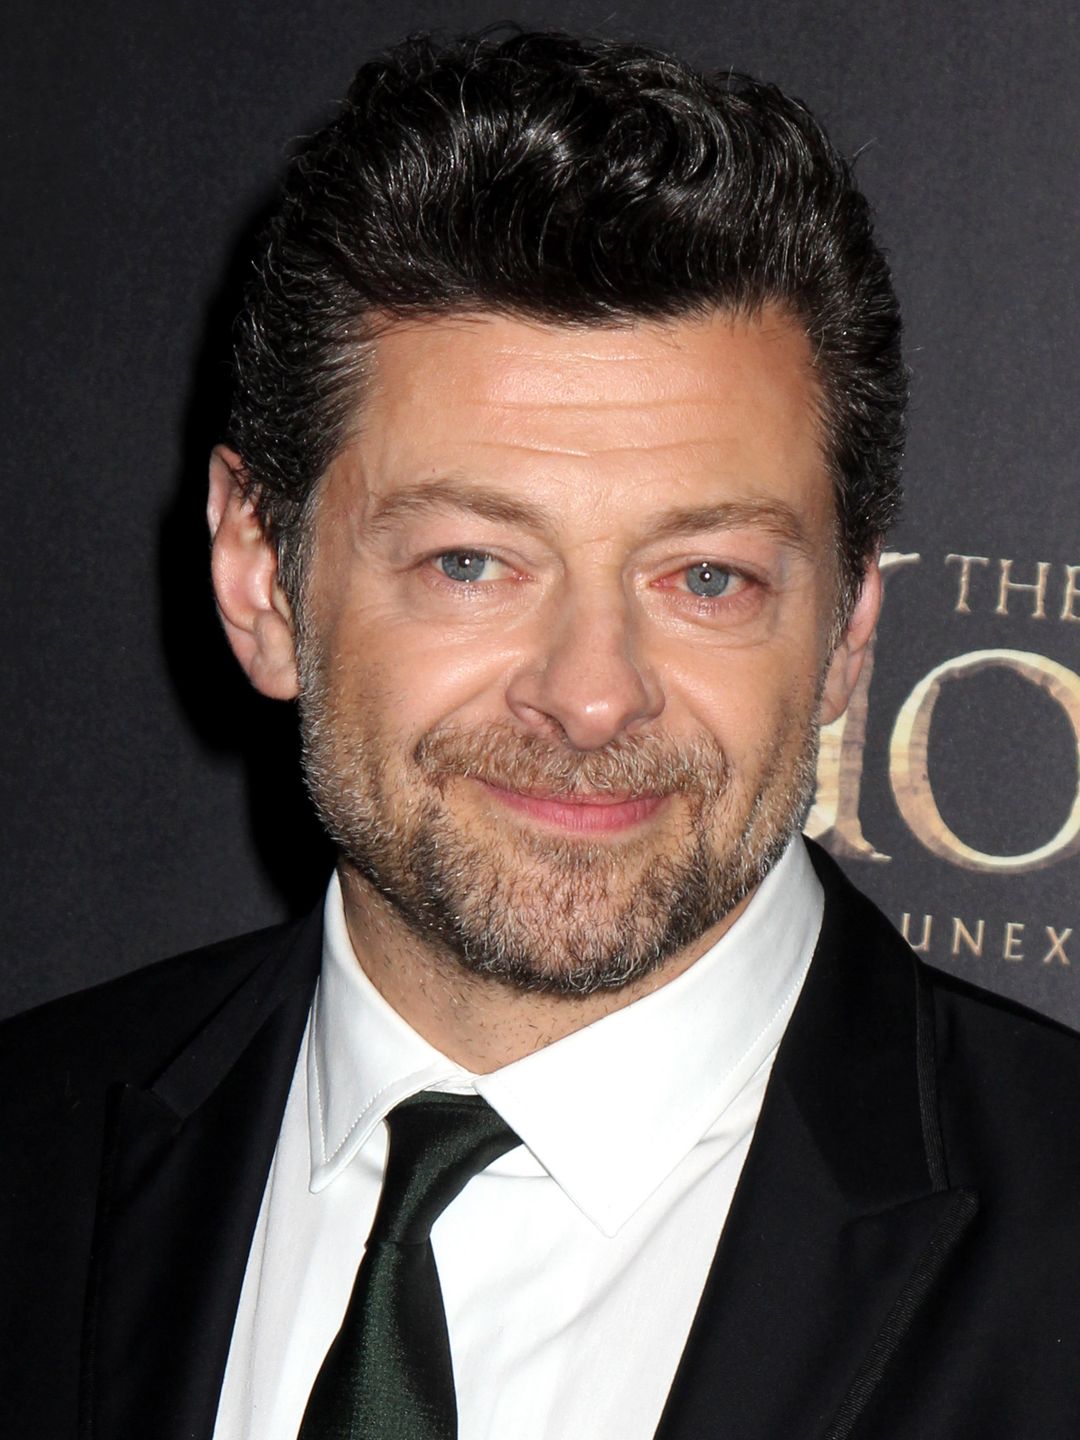 Andy Serkis personal traits